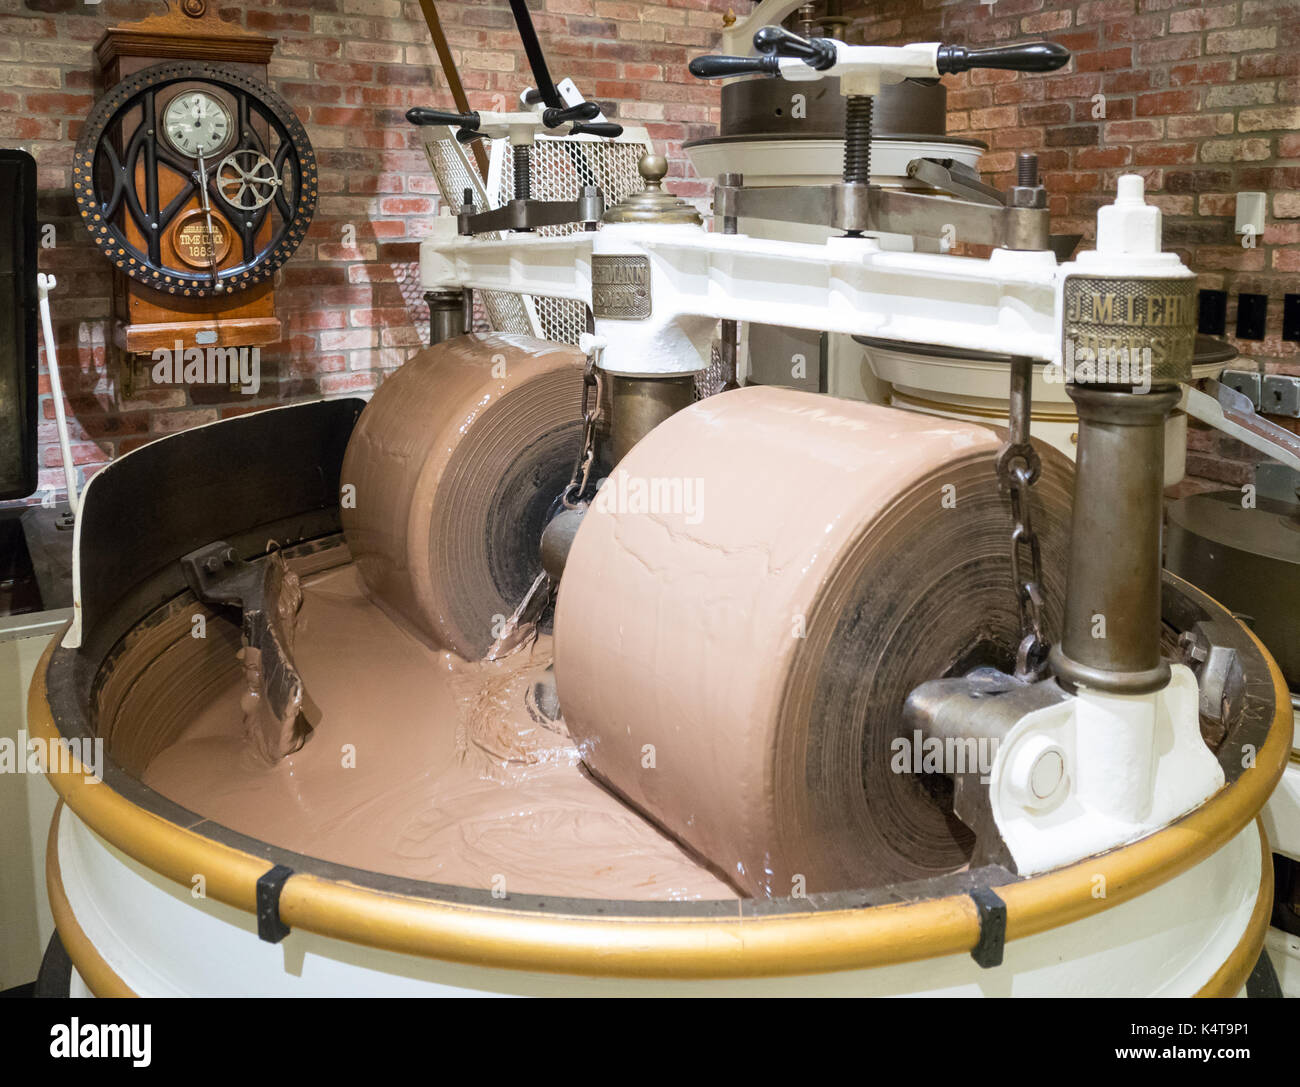 Chocolate manufacturing equipment at the Ghirardelli Original Chocolate Manufactory at Ghirardelli Square in San Francisco, California. Stock Photo